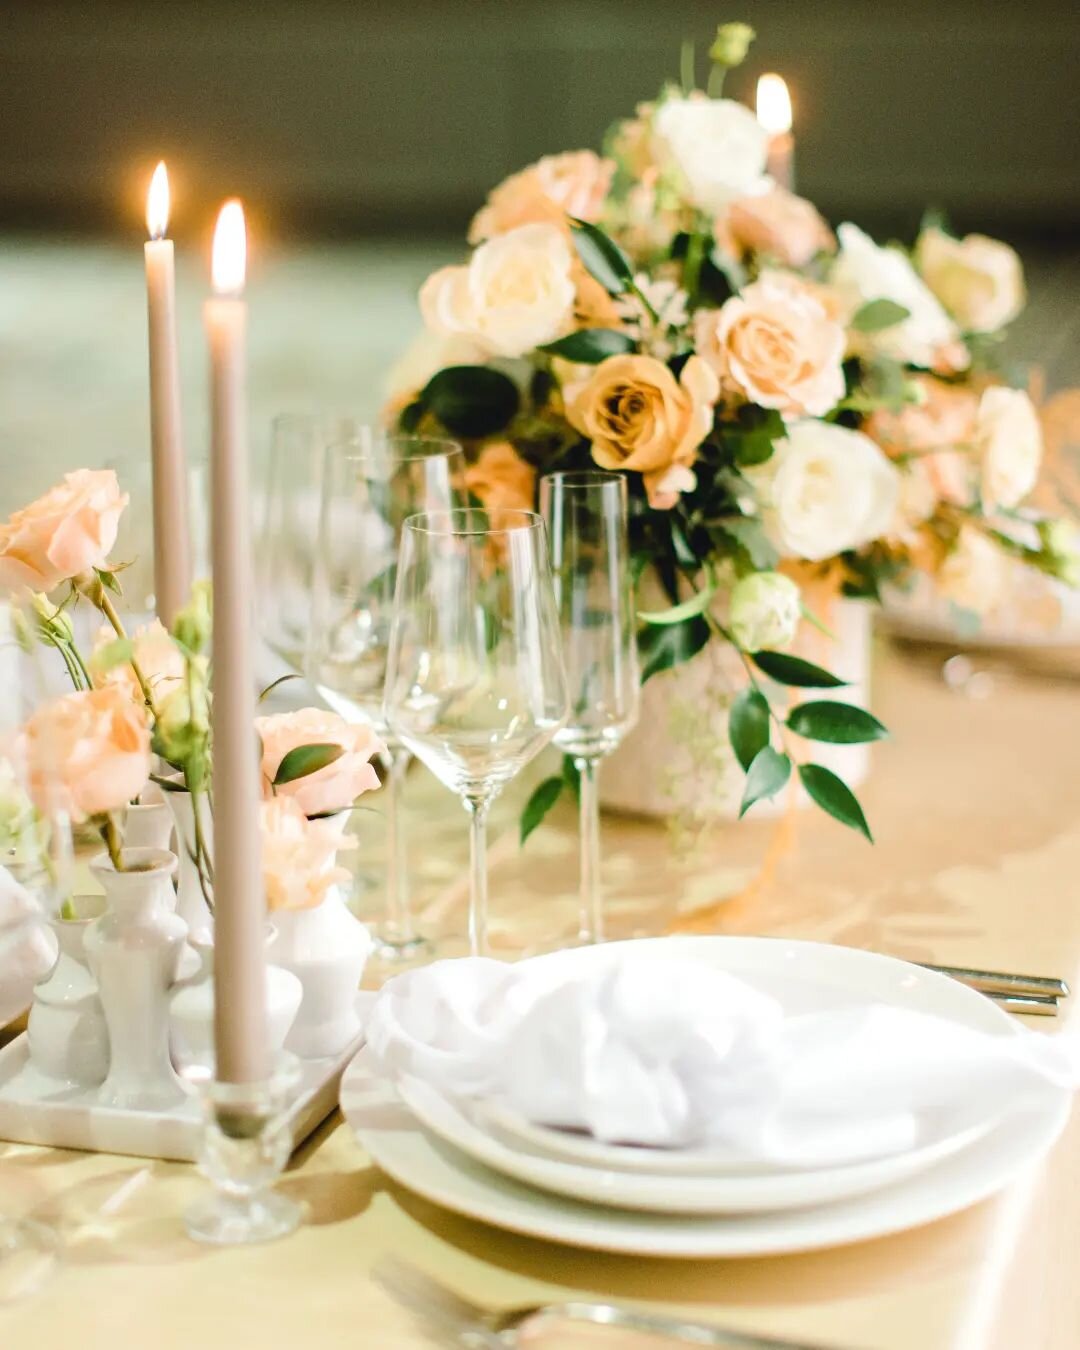 Pairing classic stemware/flatware from @poshcouturerentals alone with the cutest stationery details from @bethanyslettershop made our job super easy! We used one of our favorite blooms, Sahara Garden Roses to make the arrangements really pop into som